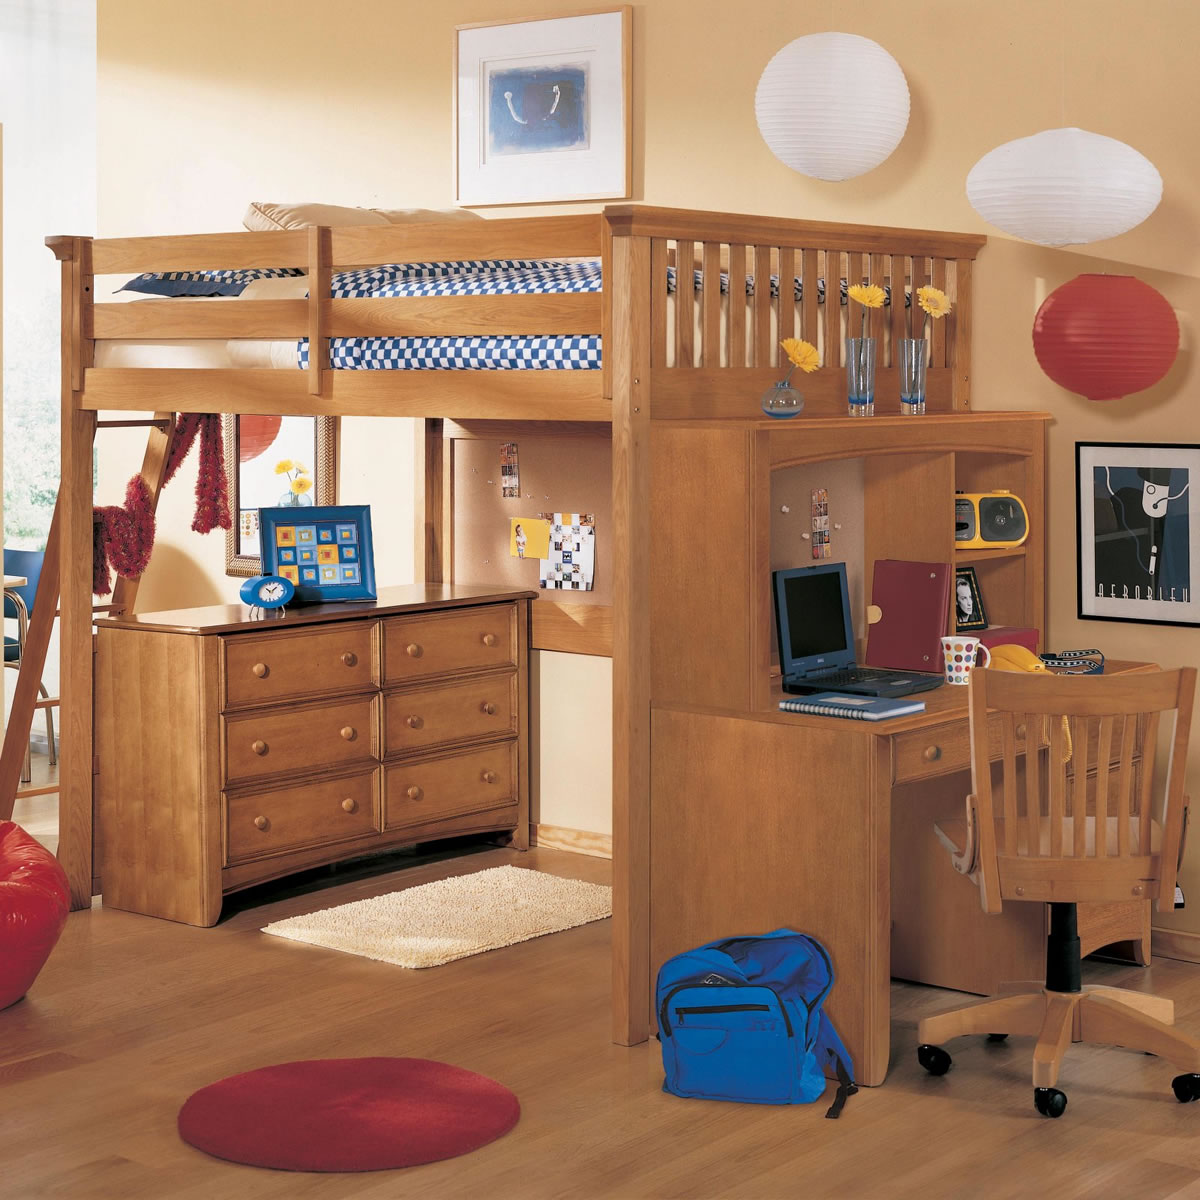 double bed bunk beds with desks underneath